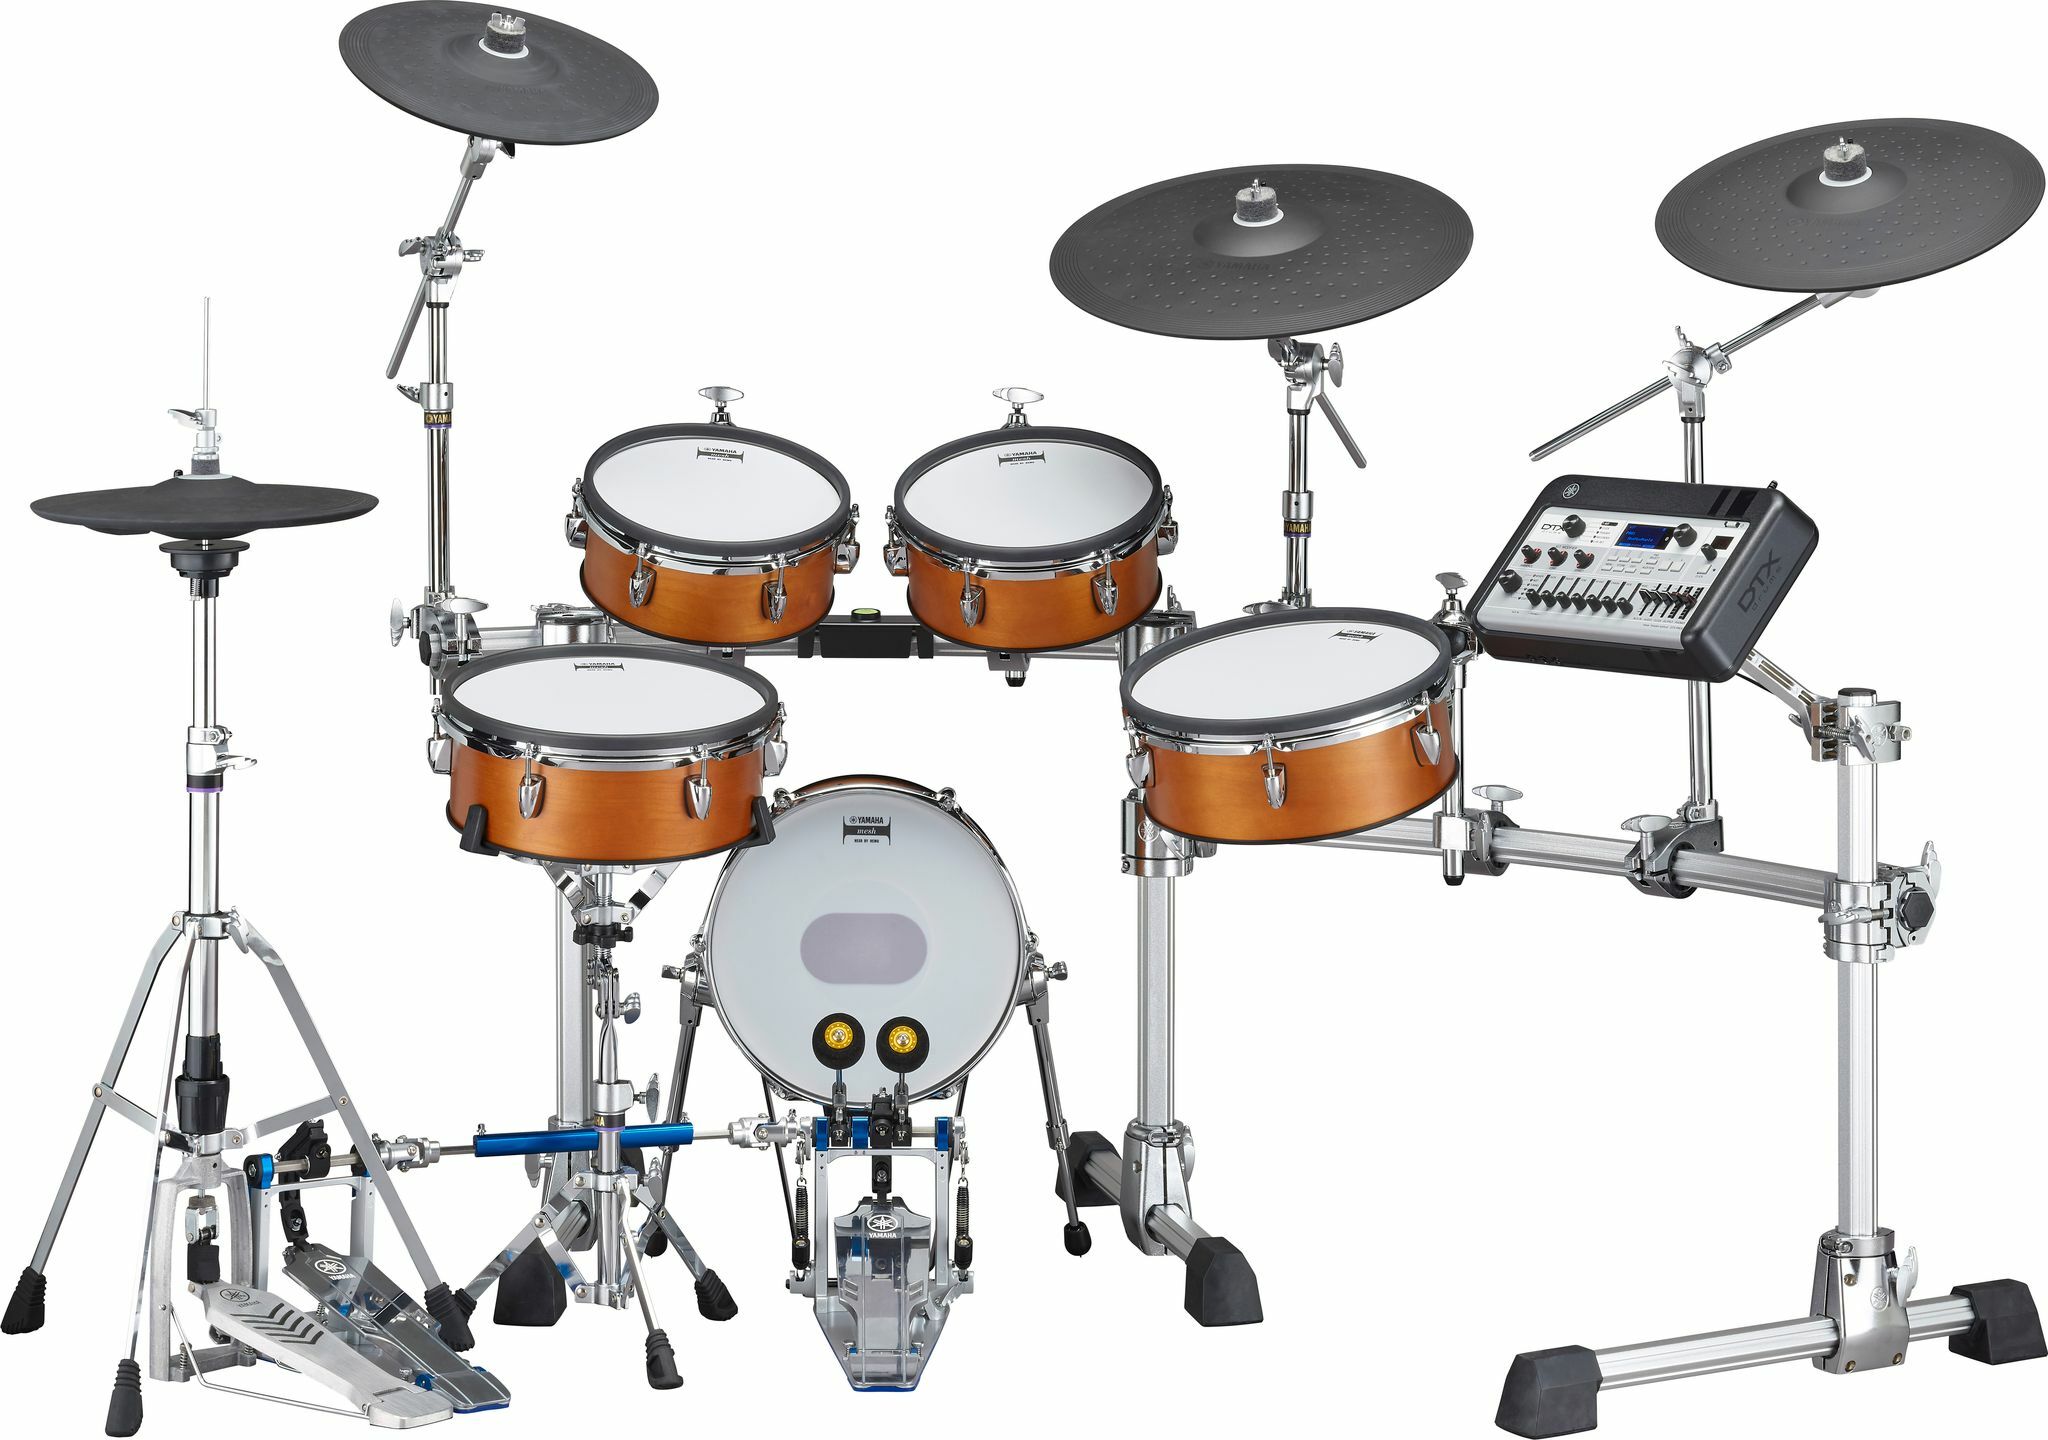 Yamaha Dtx10-km Electronic Drum Kit Mesh Real Wood - Elektronisch drumstel - Main picture